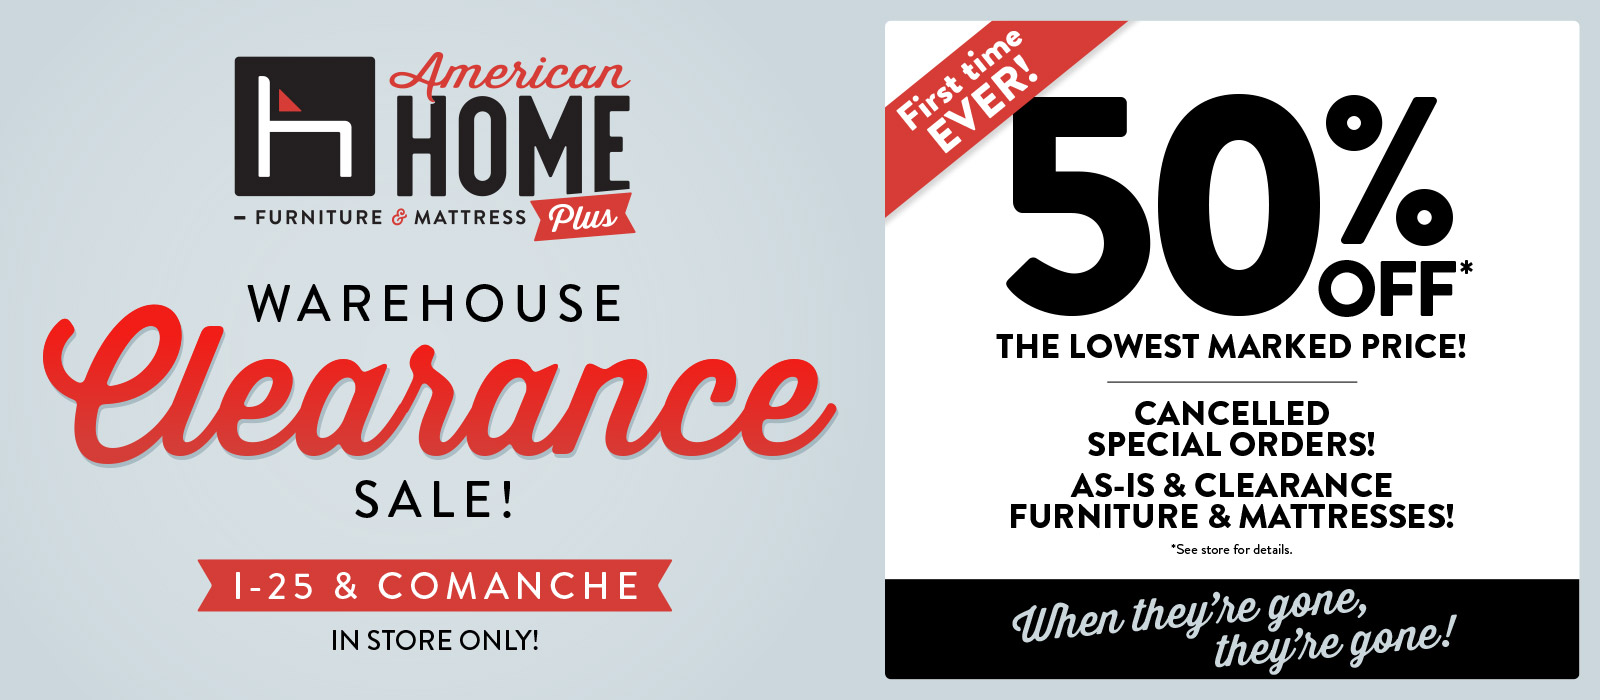 Warehouse Clearance Sale - 50% off Lowest Price